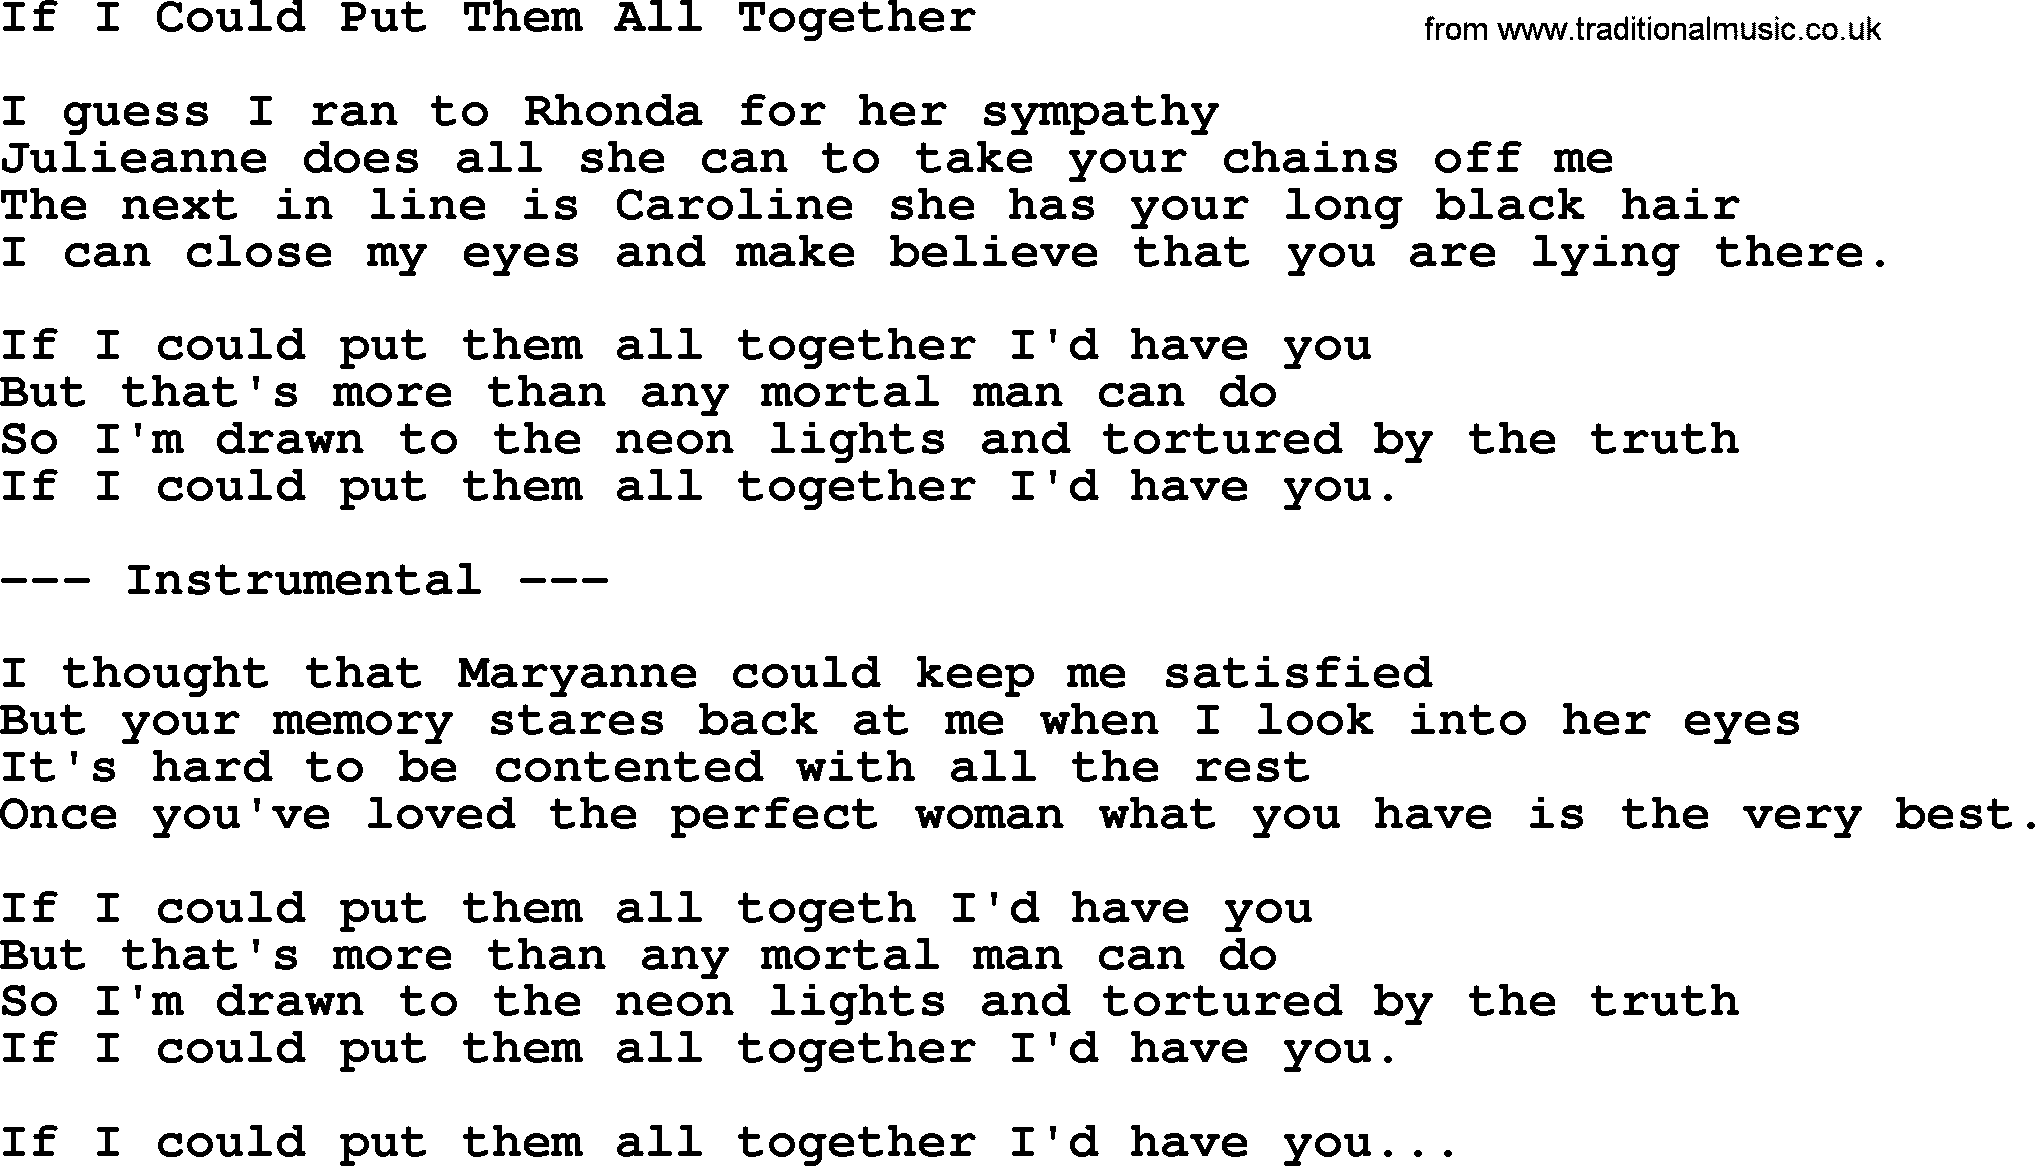 George Jones song: If I Could Put Them All Together, lyrics